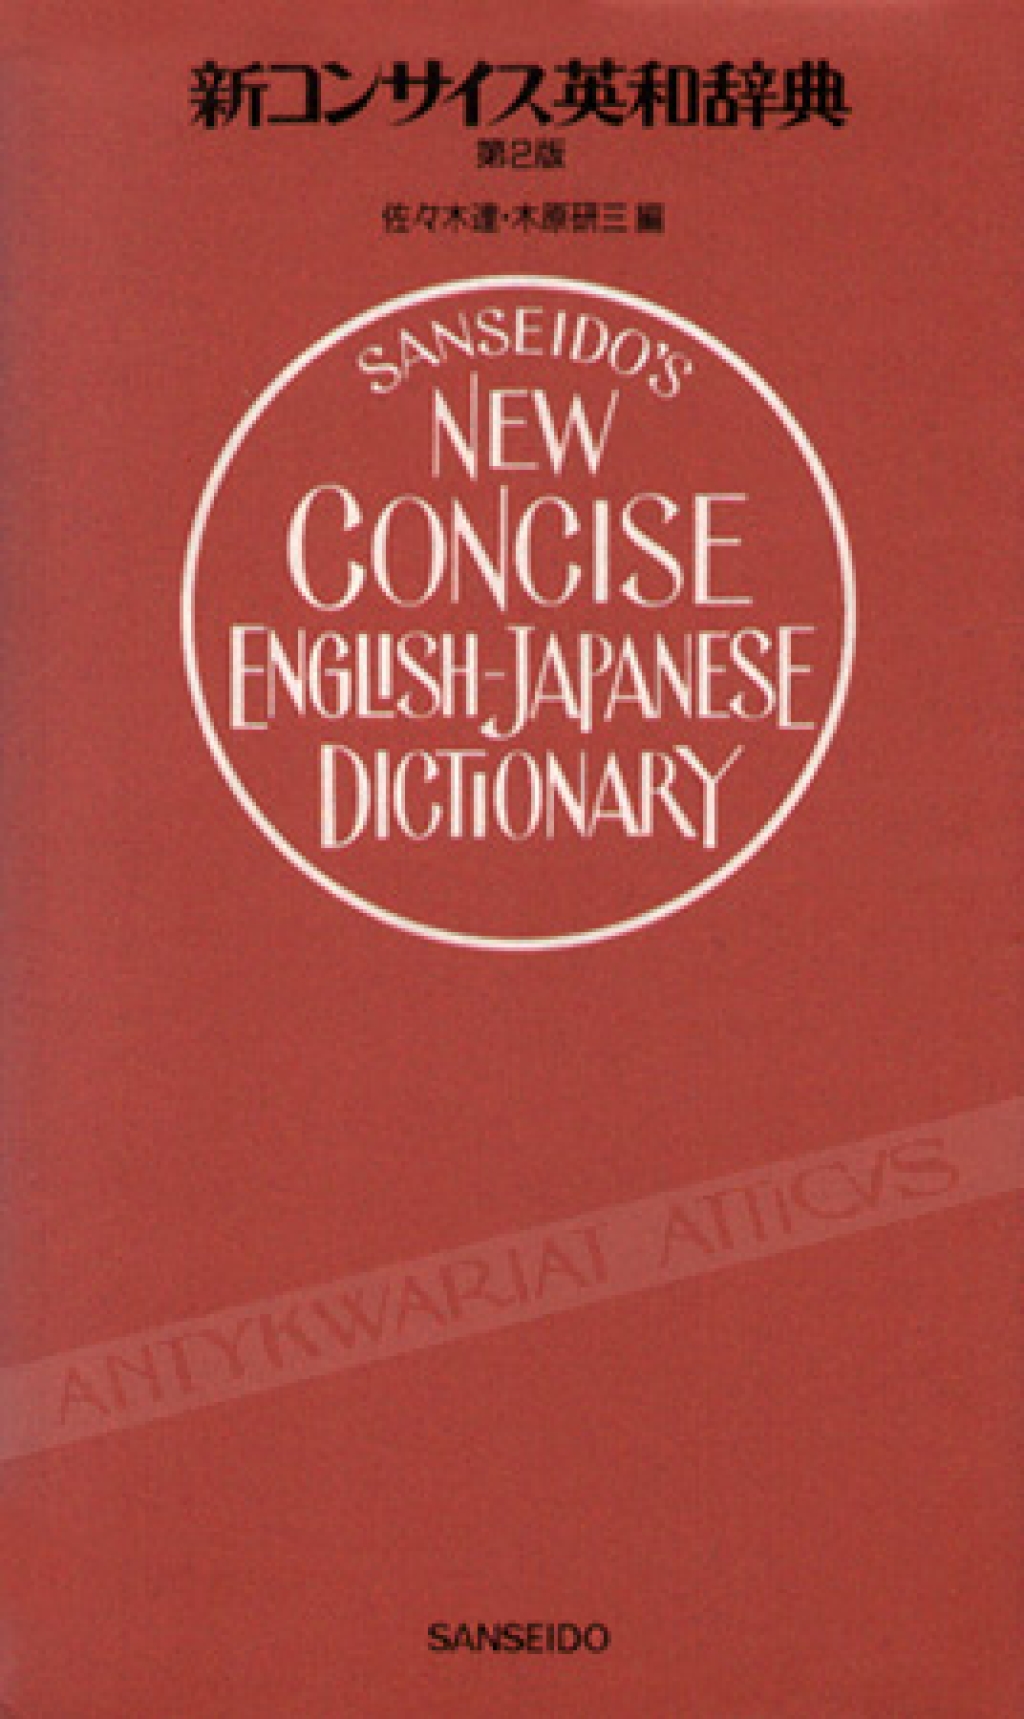 New Concise English-Japanese Dictionary